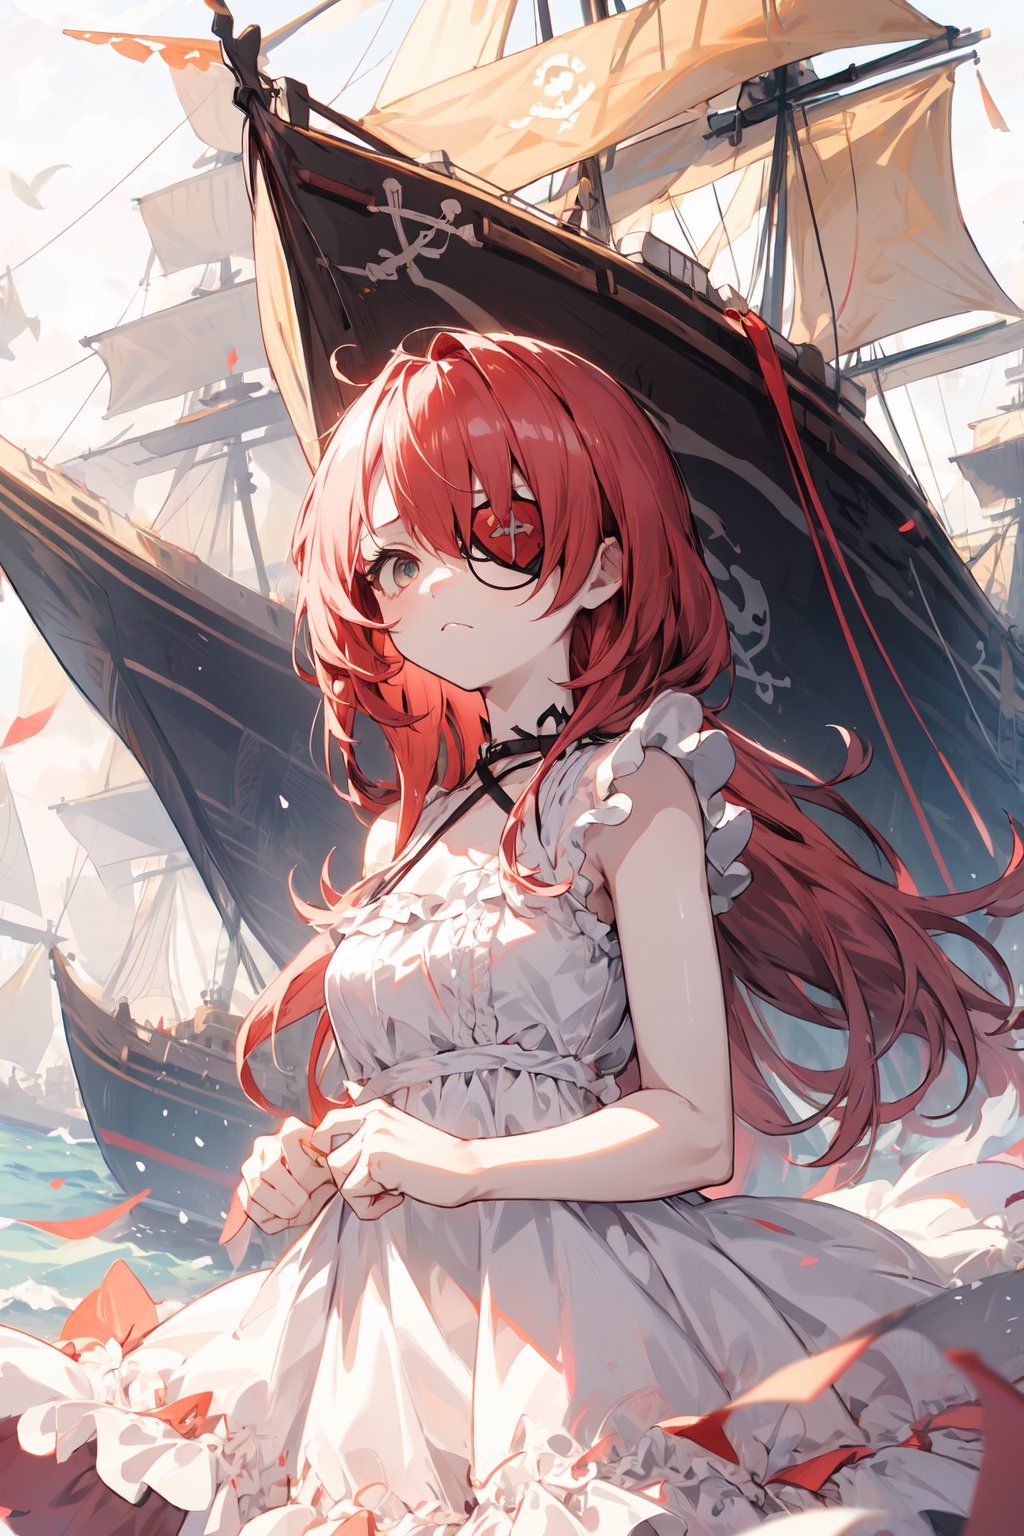 A girl wearing an eye patch,long red hair,white skin,wearing a fluffy pink dress with ruffles,pirate ship background, very sad.